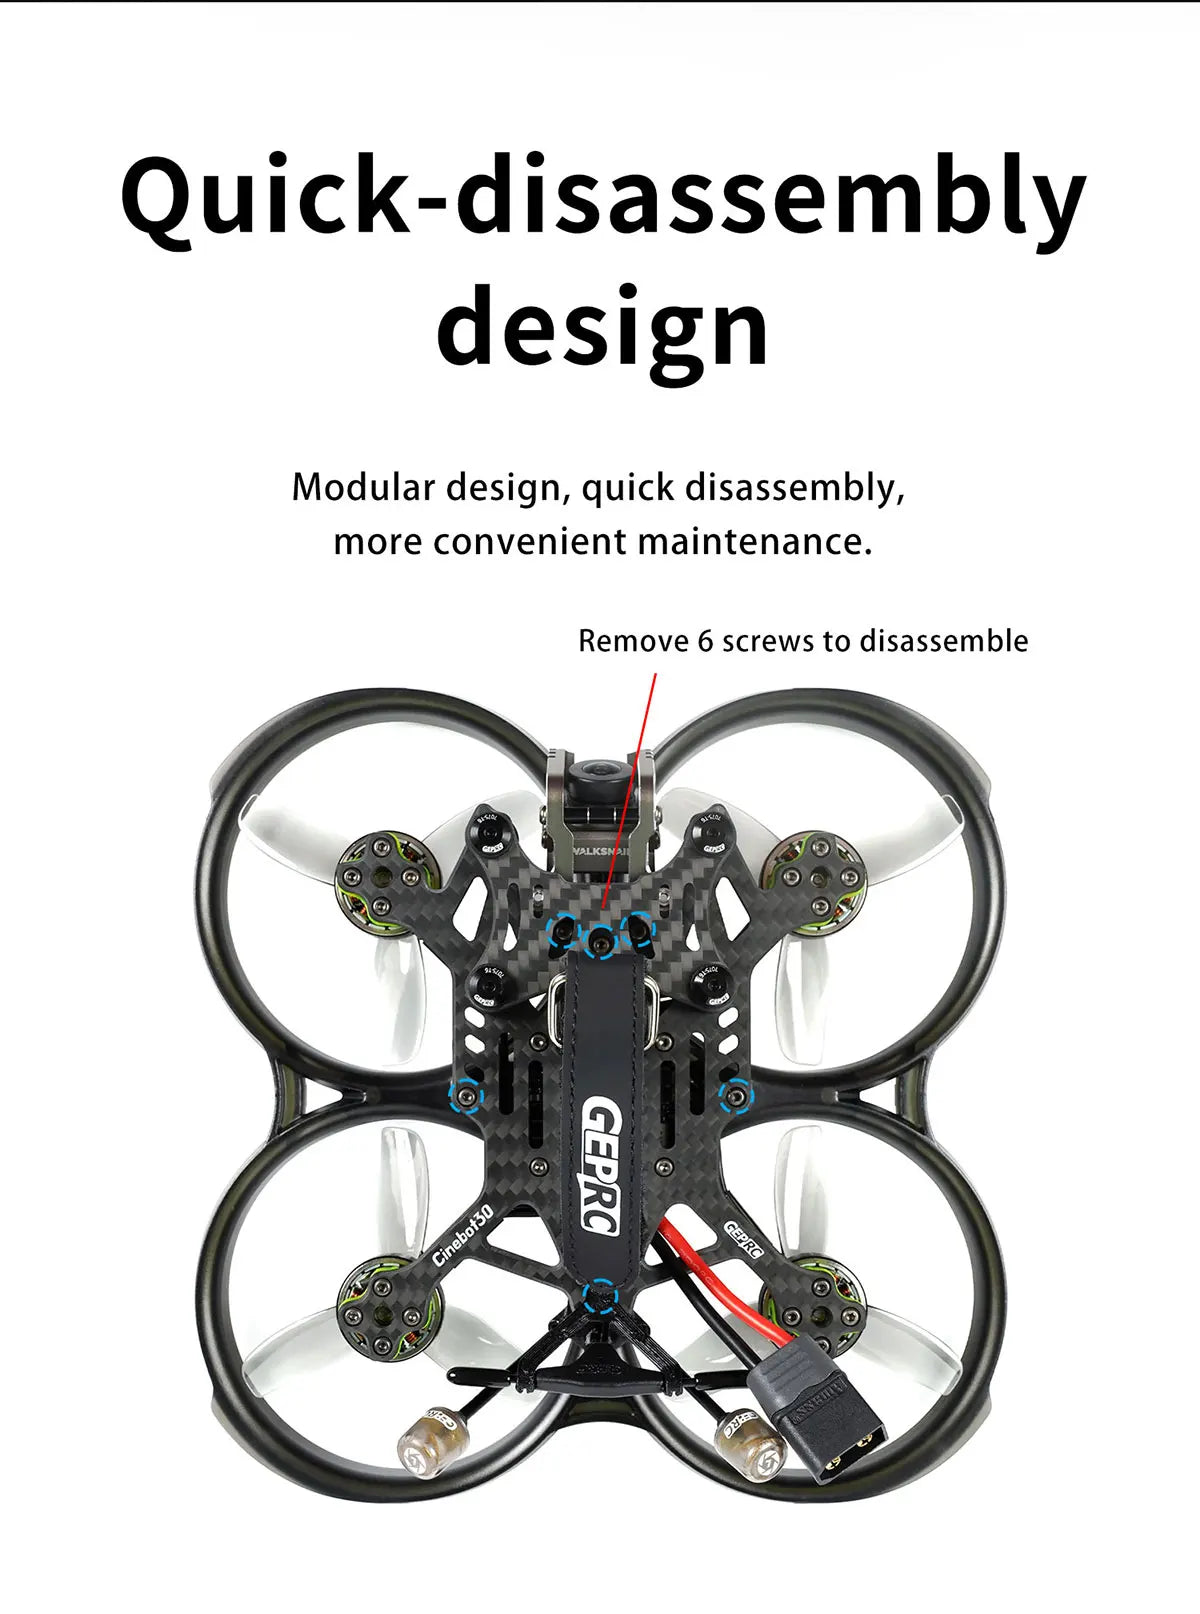 GEPRC Cinebot30 FPV Drone, Quick-disassembly design Cinebot3o easy to disassemble 